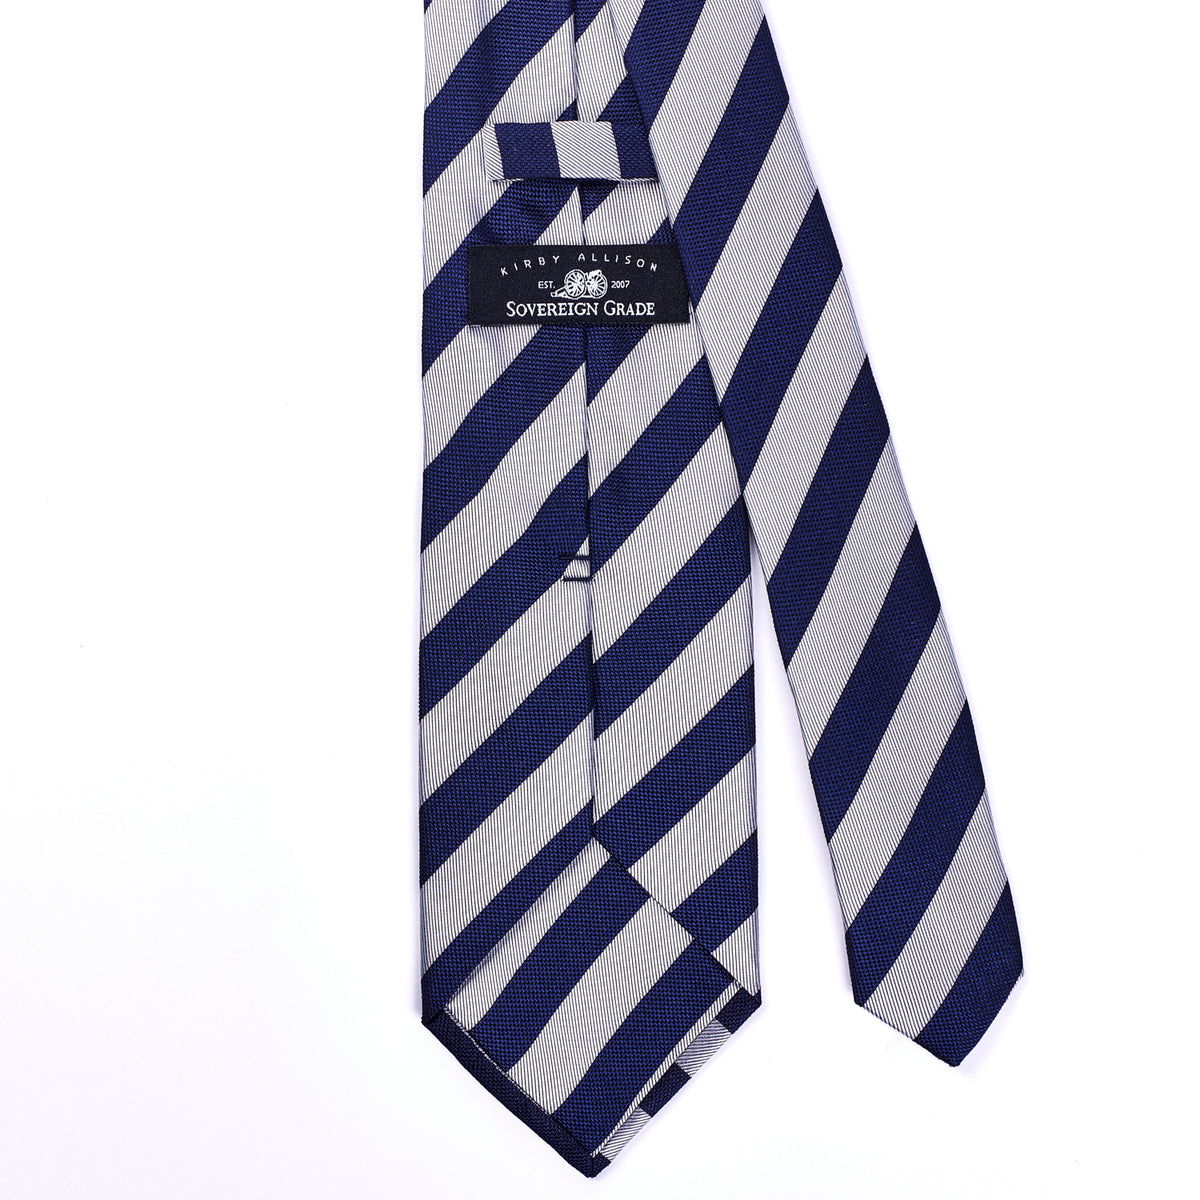 A handmade United Kingdom Sovereign Grade woven navy and silver rep tie, 150 cm, on a white background, from the KirbyAllison.com ties collection.